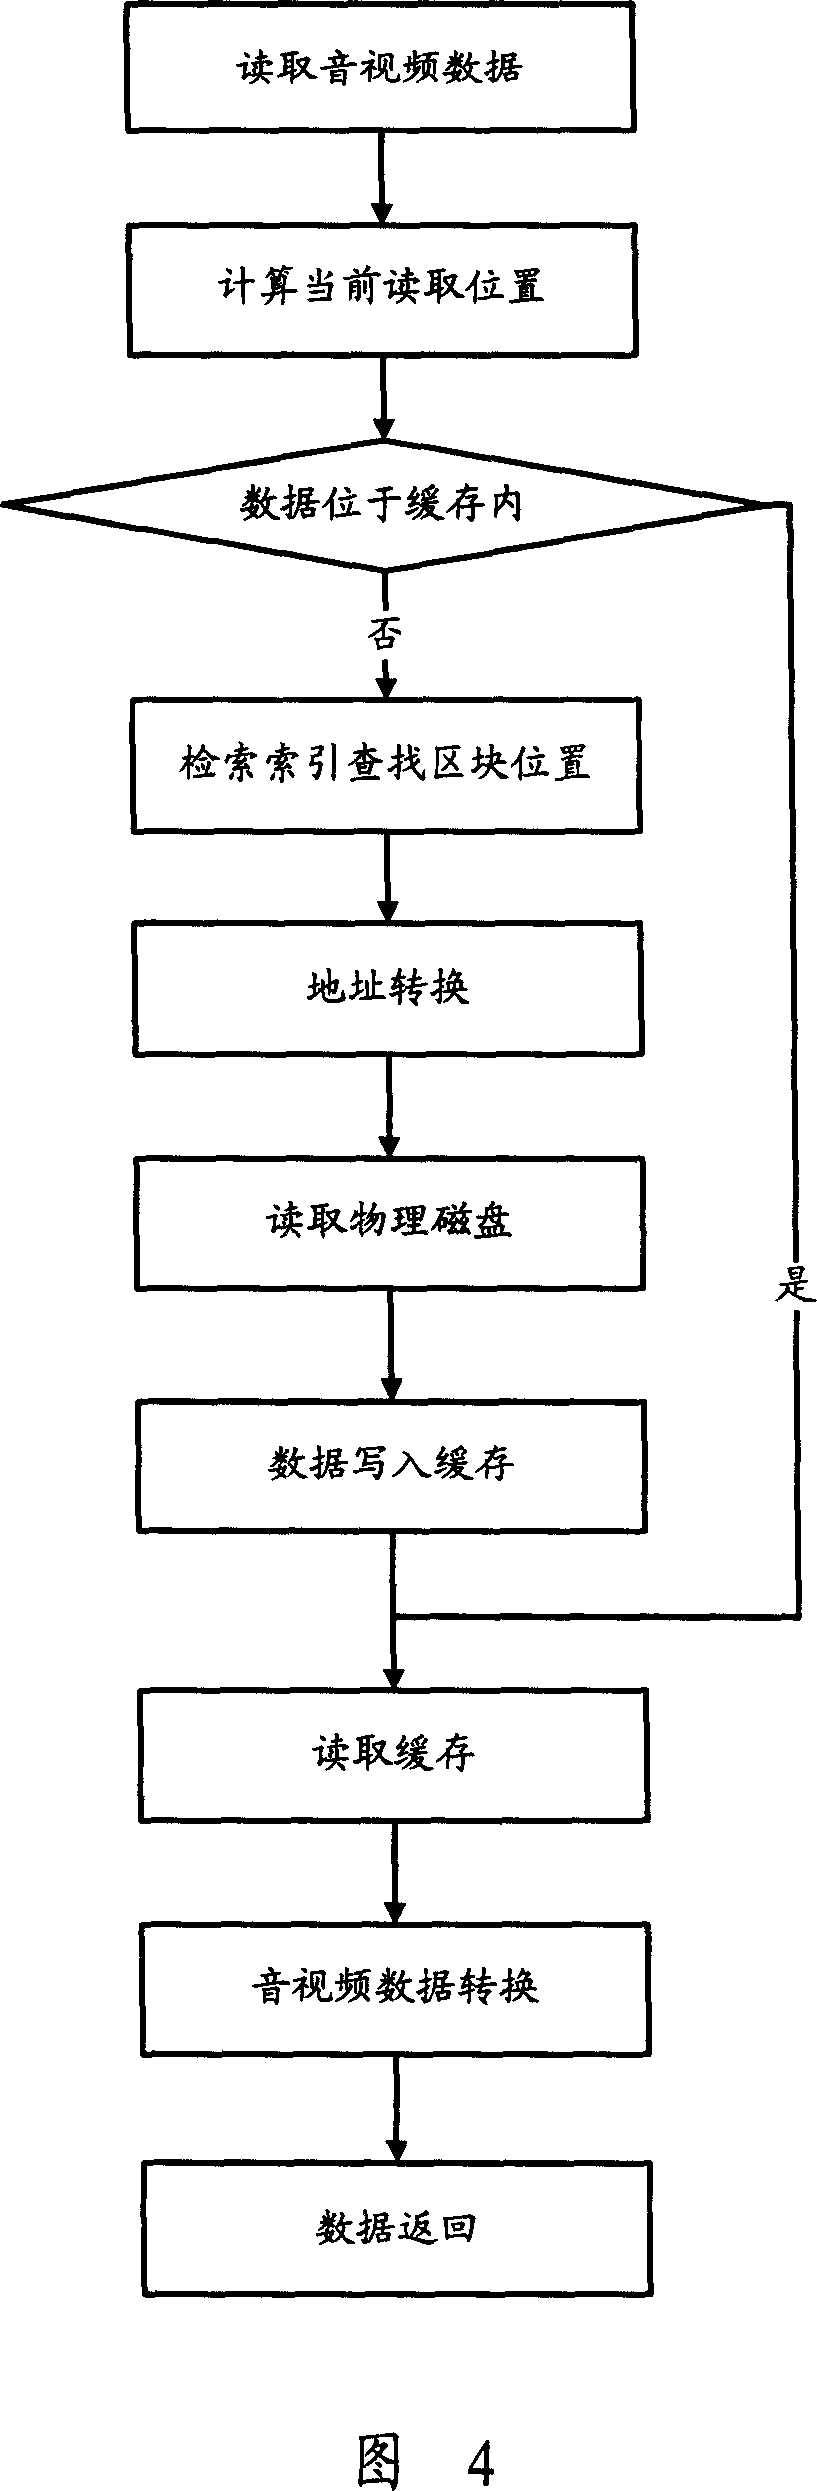 Audio/video data access method and device based on raw device